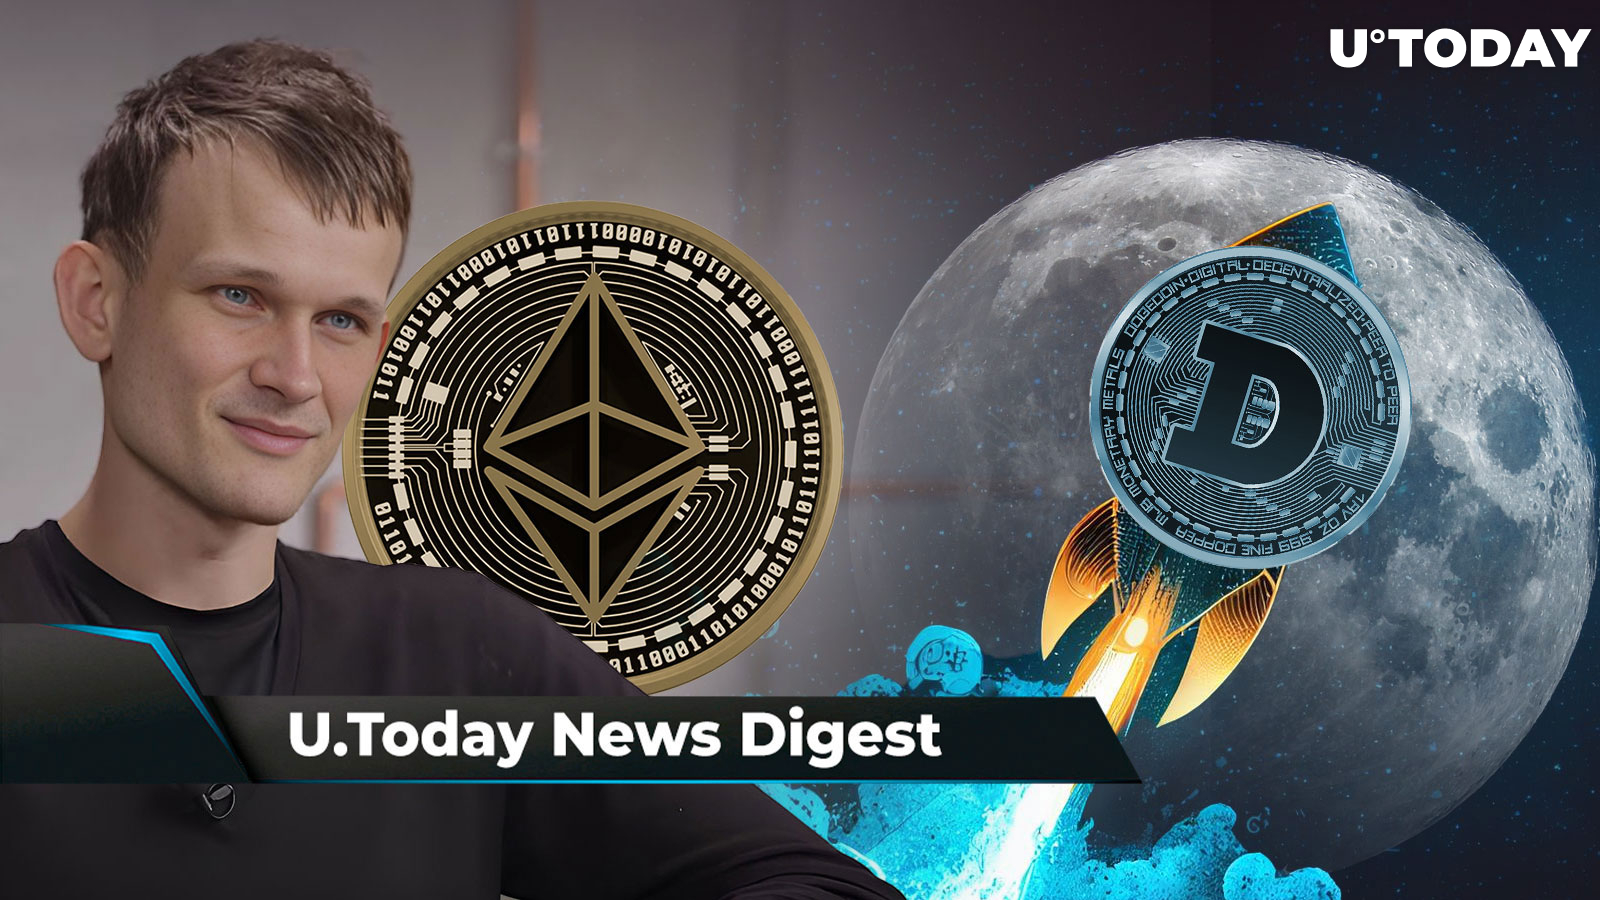 Pro-XRP Lawyer Wants to Testify at Crypto Hearing, 635 Million DOGE on Move Ahead of DOGE-1 Lunar Mission, Vitalik Buterin Sets Ambitious Target for L2s: Crypto News Digest by U.Today